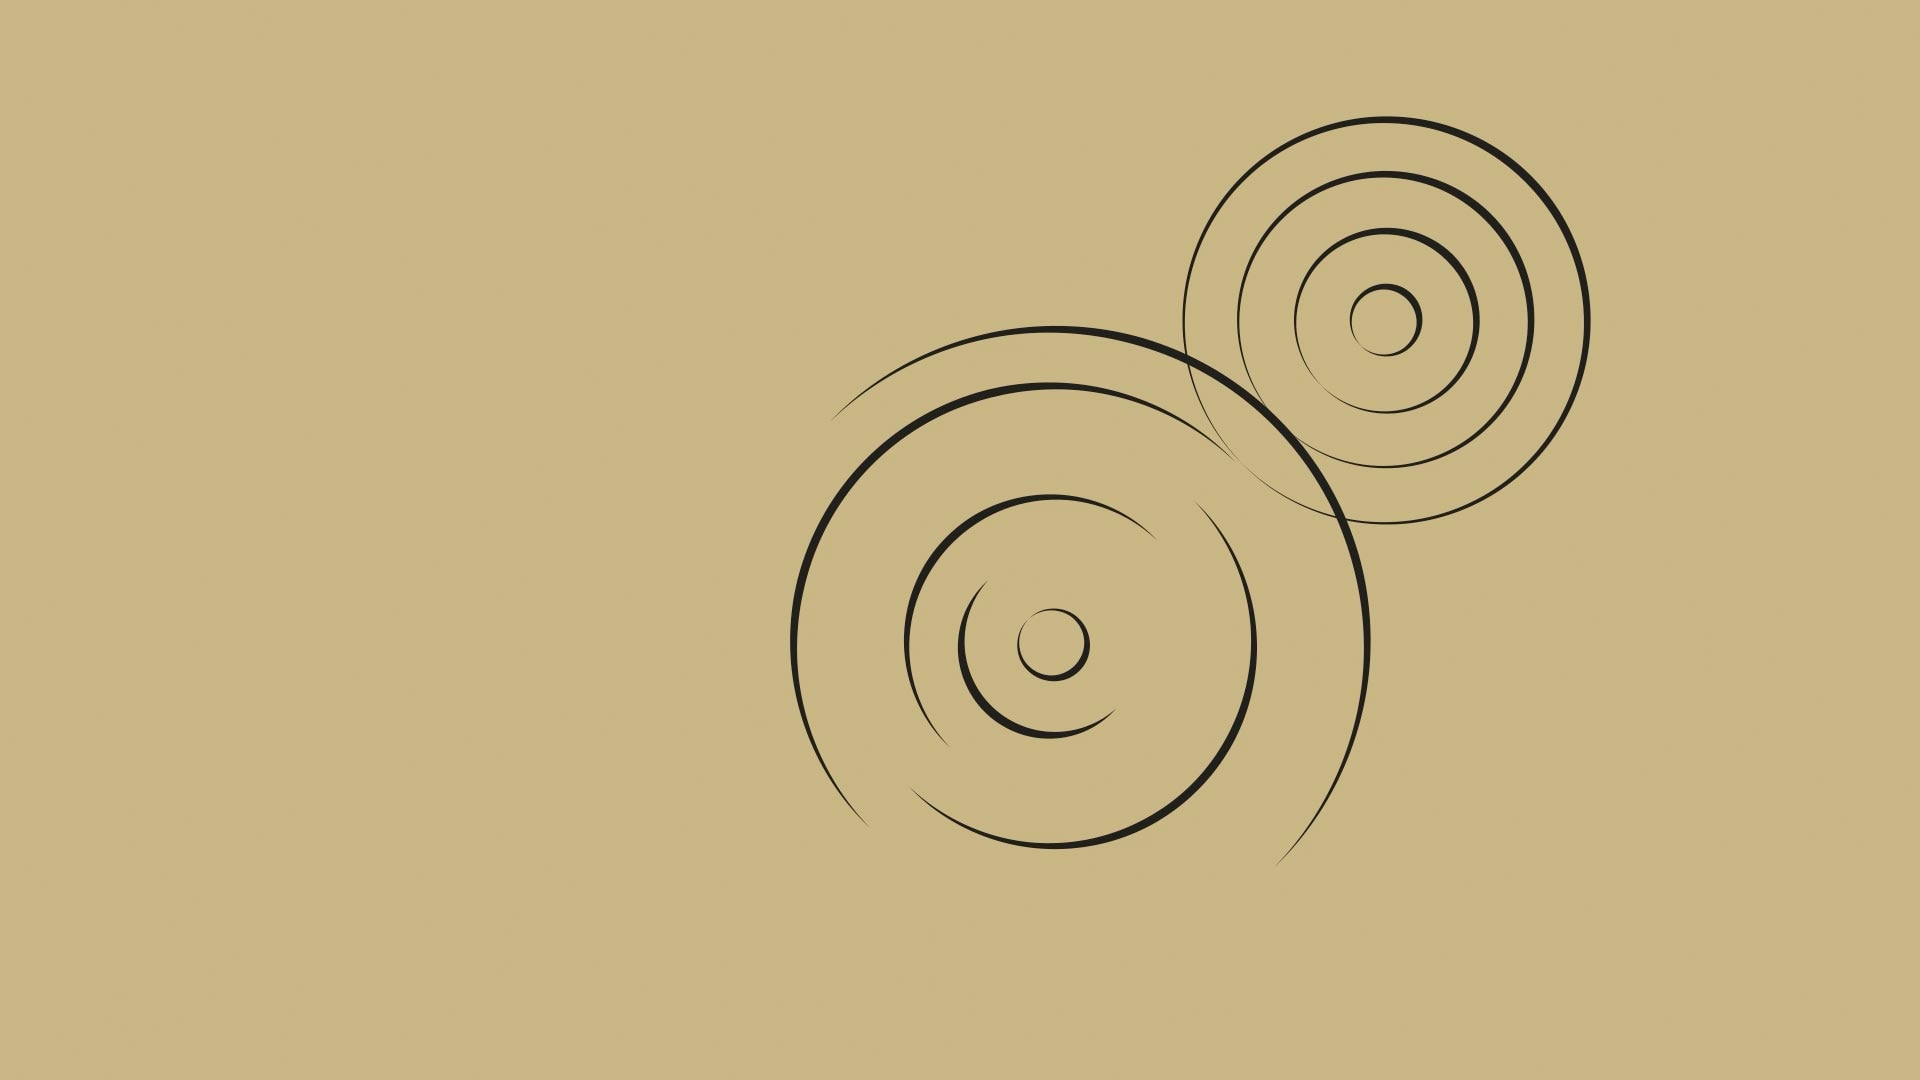 Abstract graphic of spinning circular lines on a bronze background.